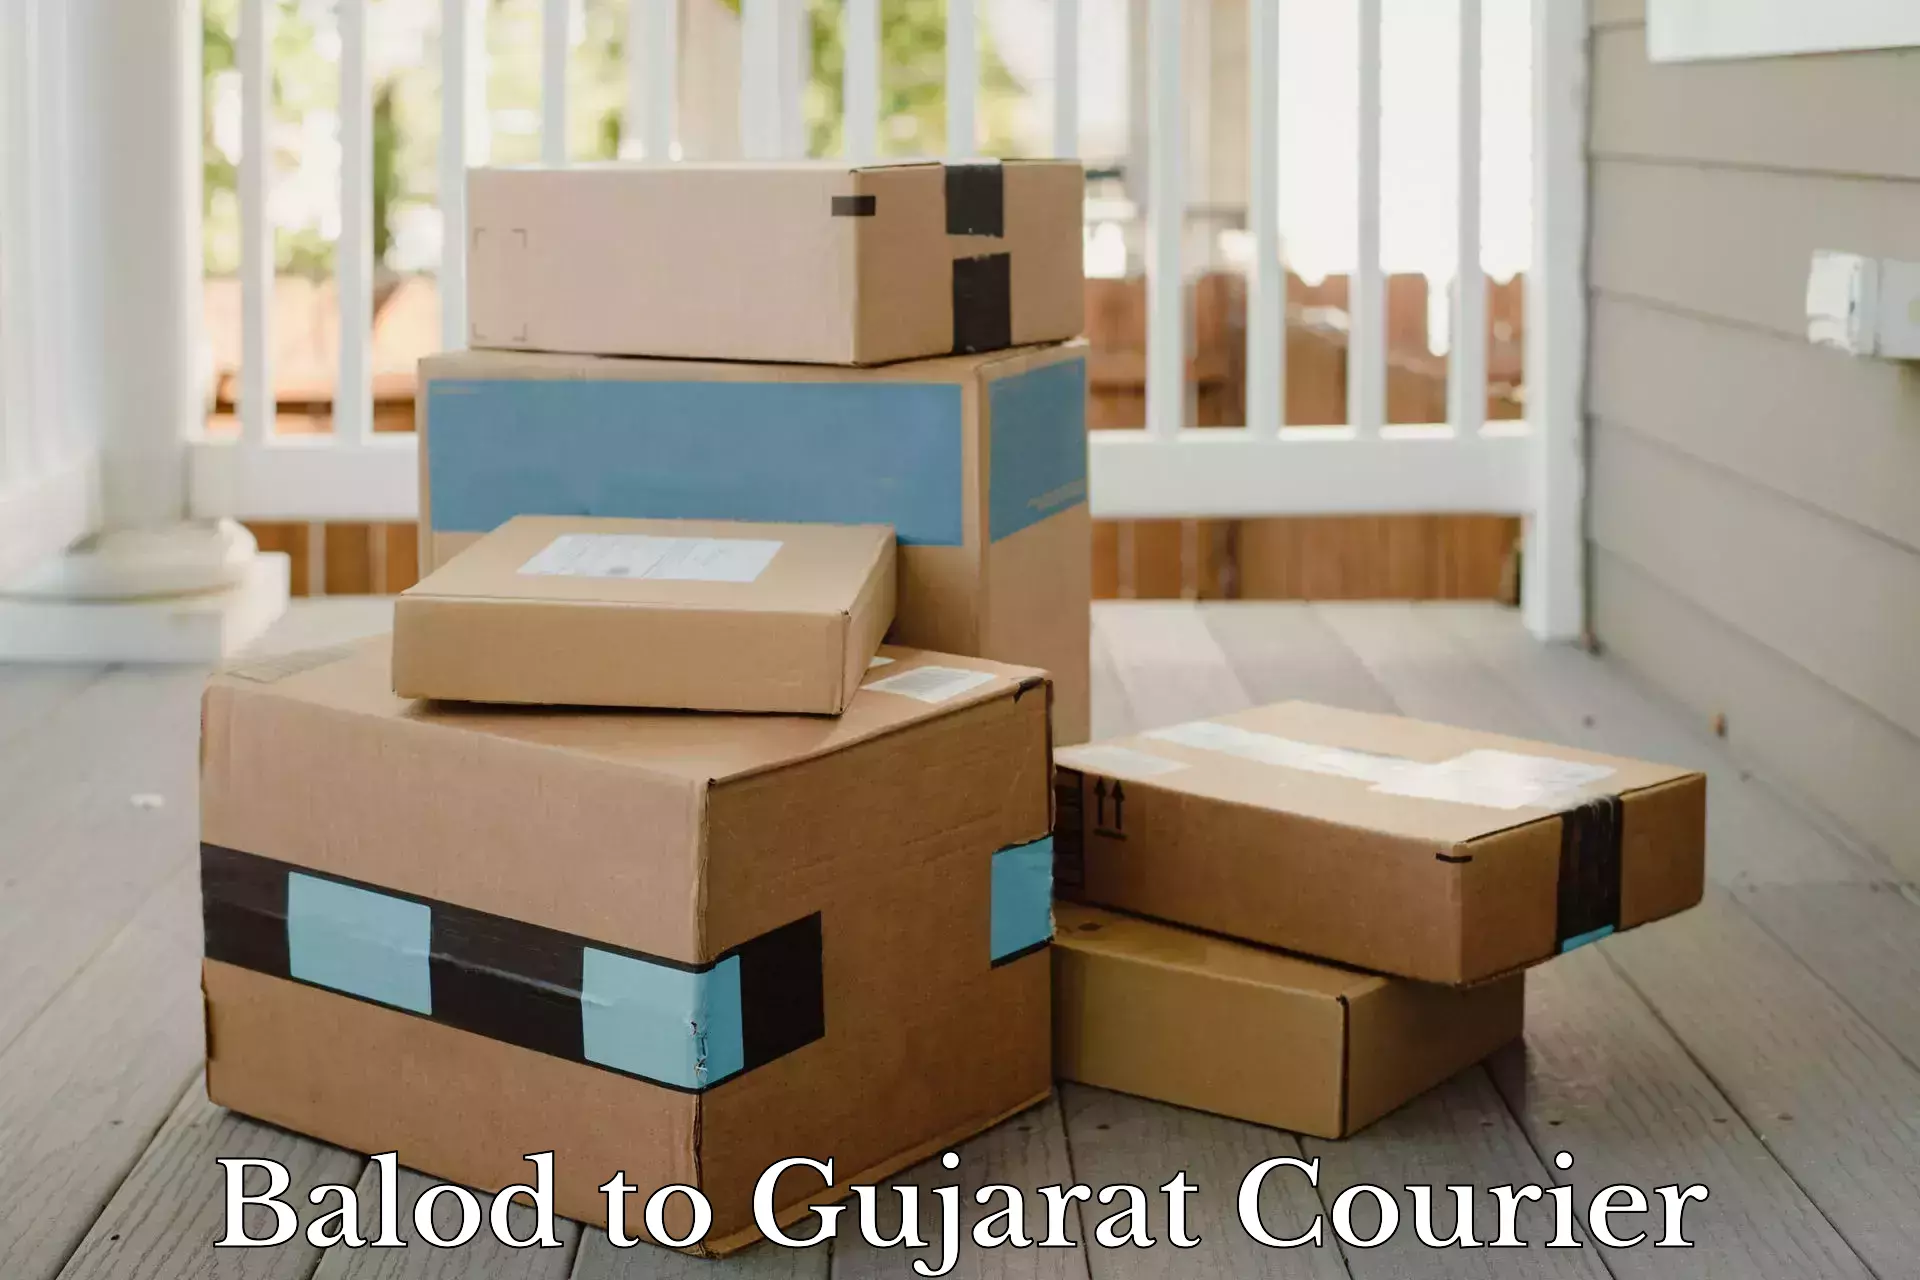 Nationwide parcel services Balod to Gujarat